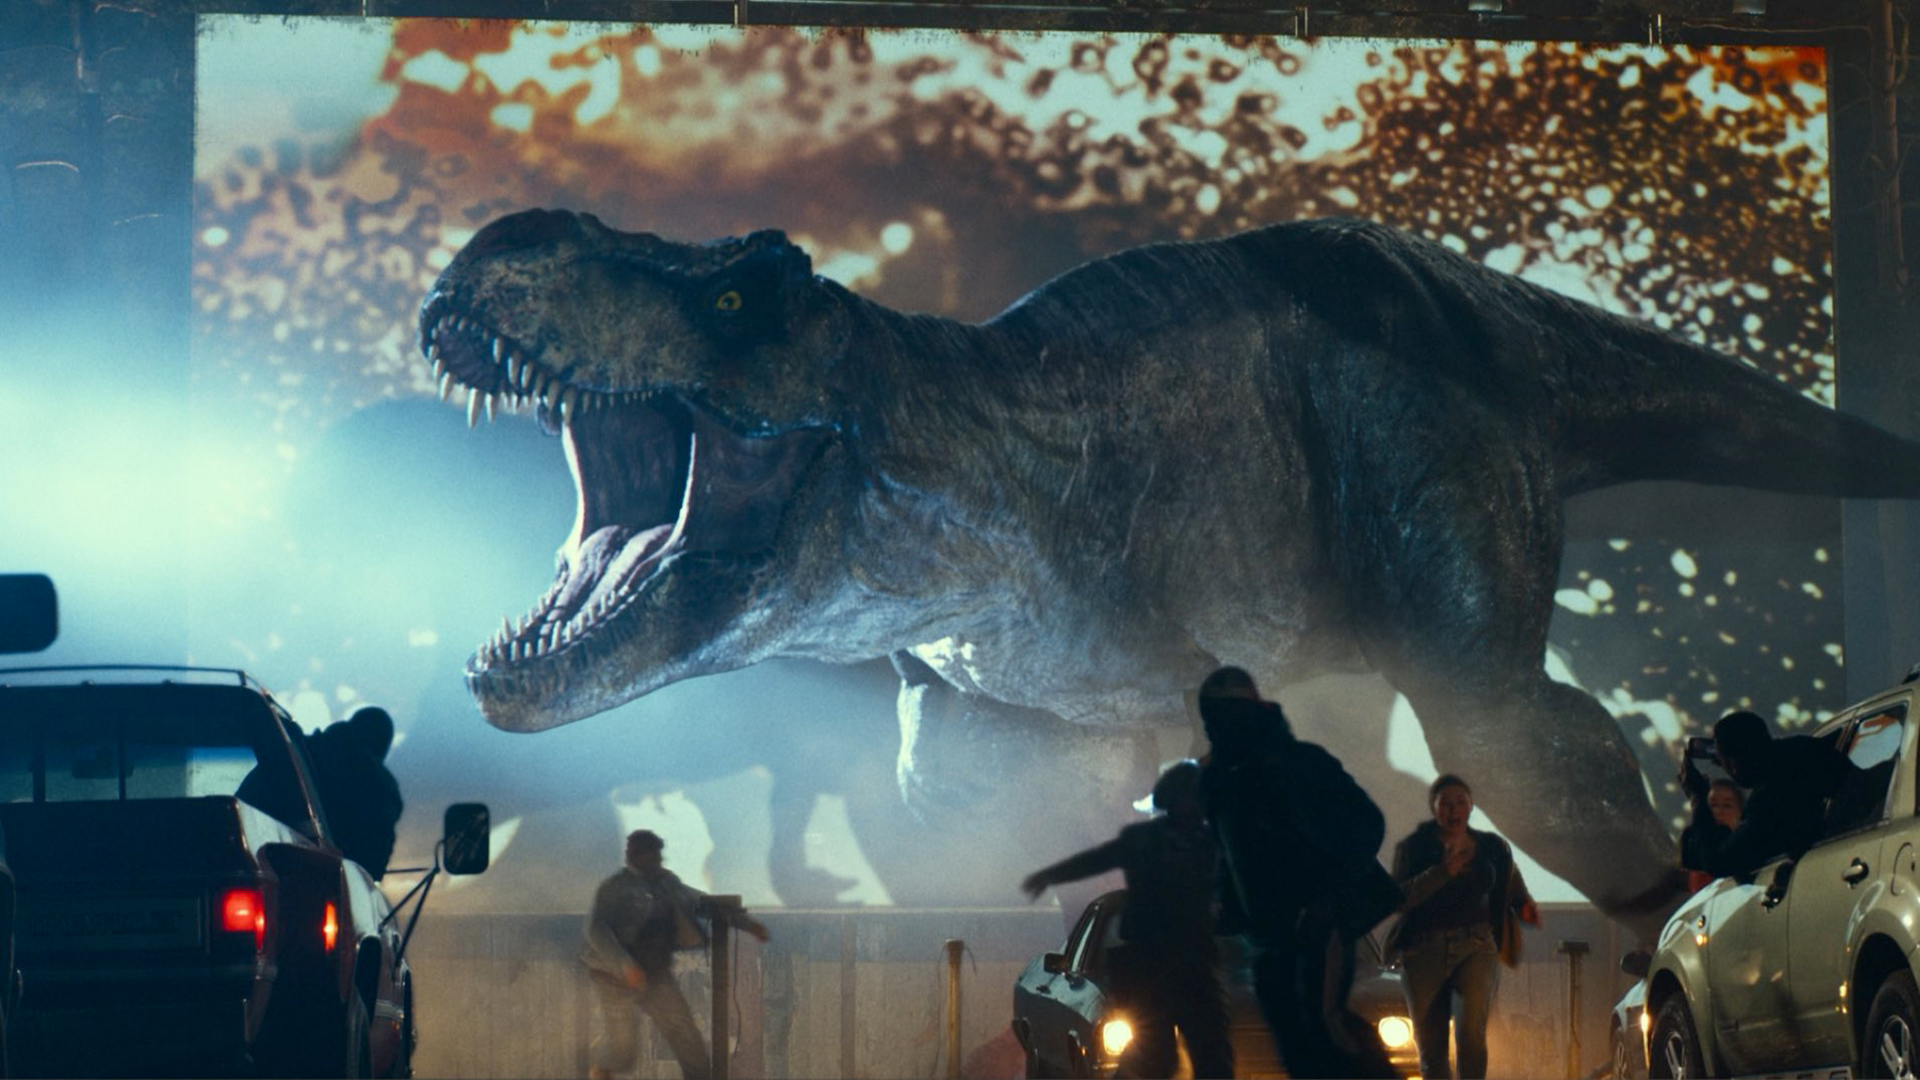 Jurassic World Dominion will have a 2 hours 23 minutes long runtime